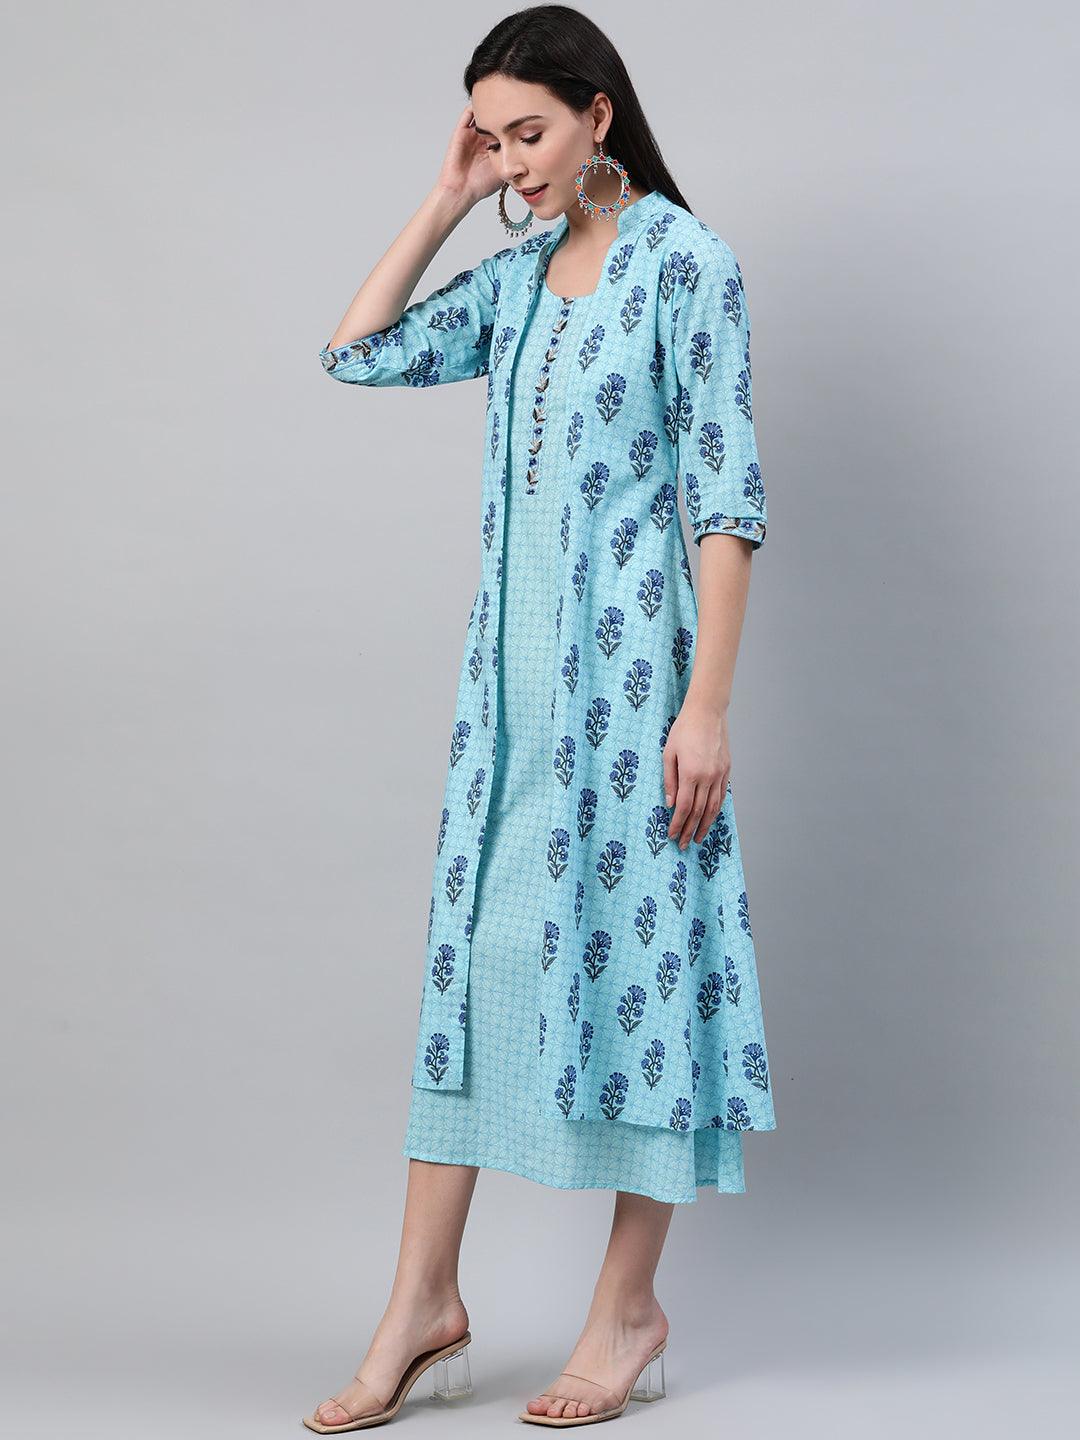 Blue Printed Cotton Dress With Jacket - Libas